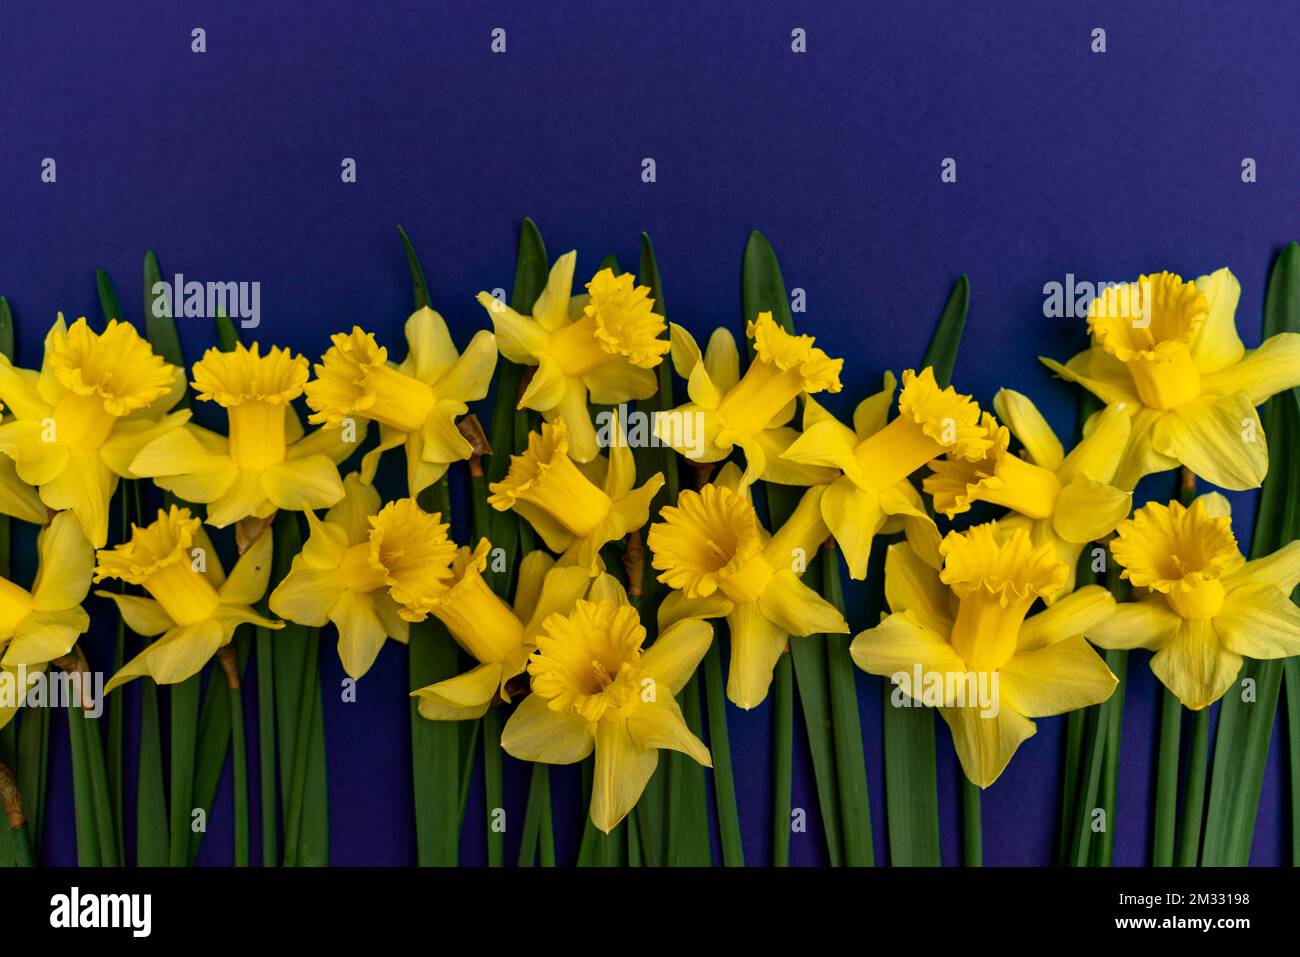 large bouquet of yellow daffodils on an indigo background. Copy space. Can be used as a card, background for screensavers Stock Photo